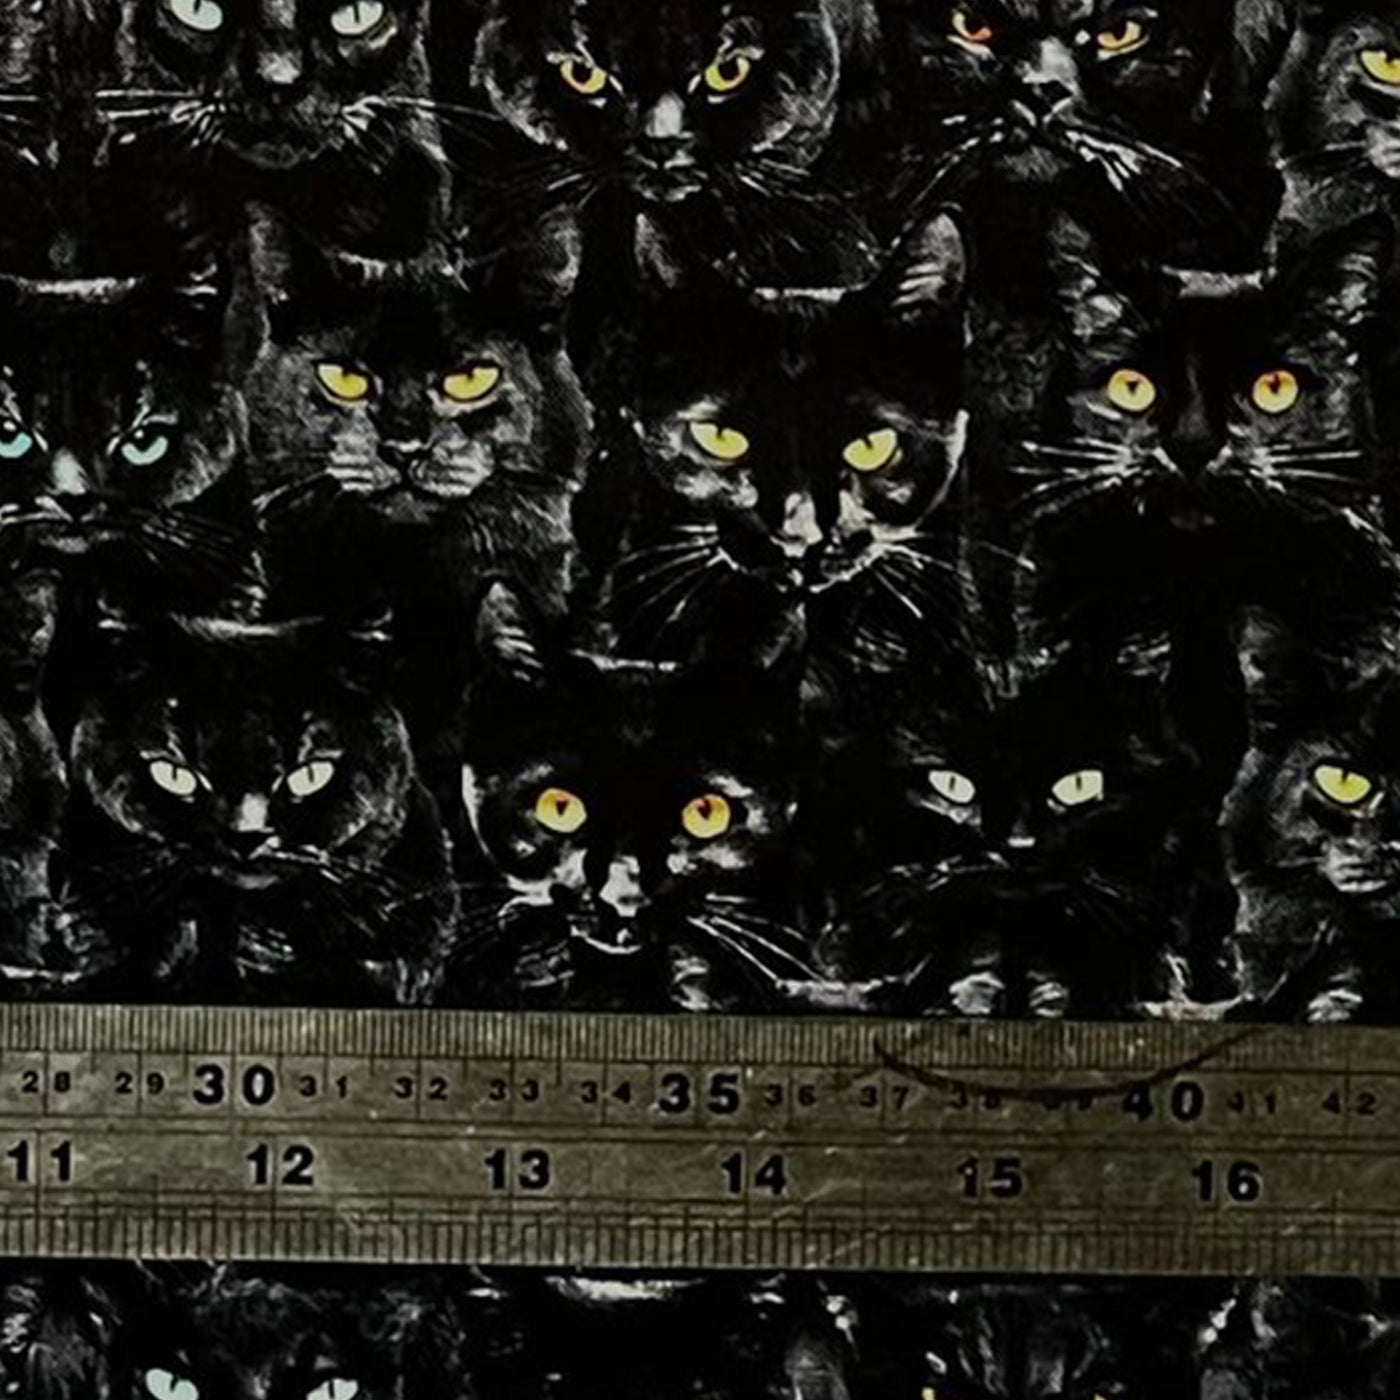 100% cotton fabric with rows of black cats all with different coloured staring eyes